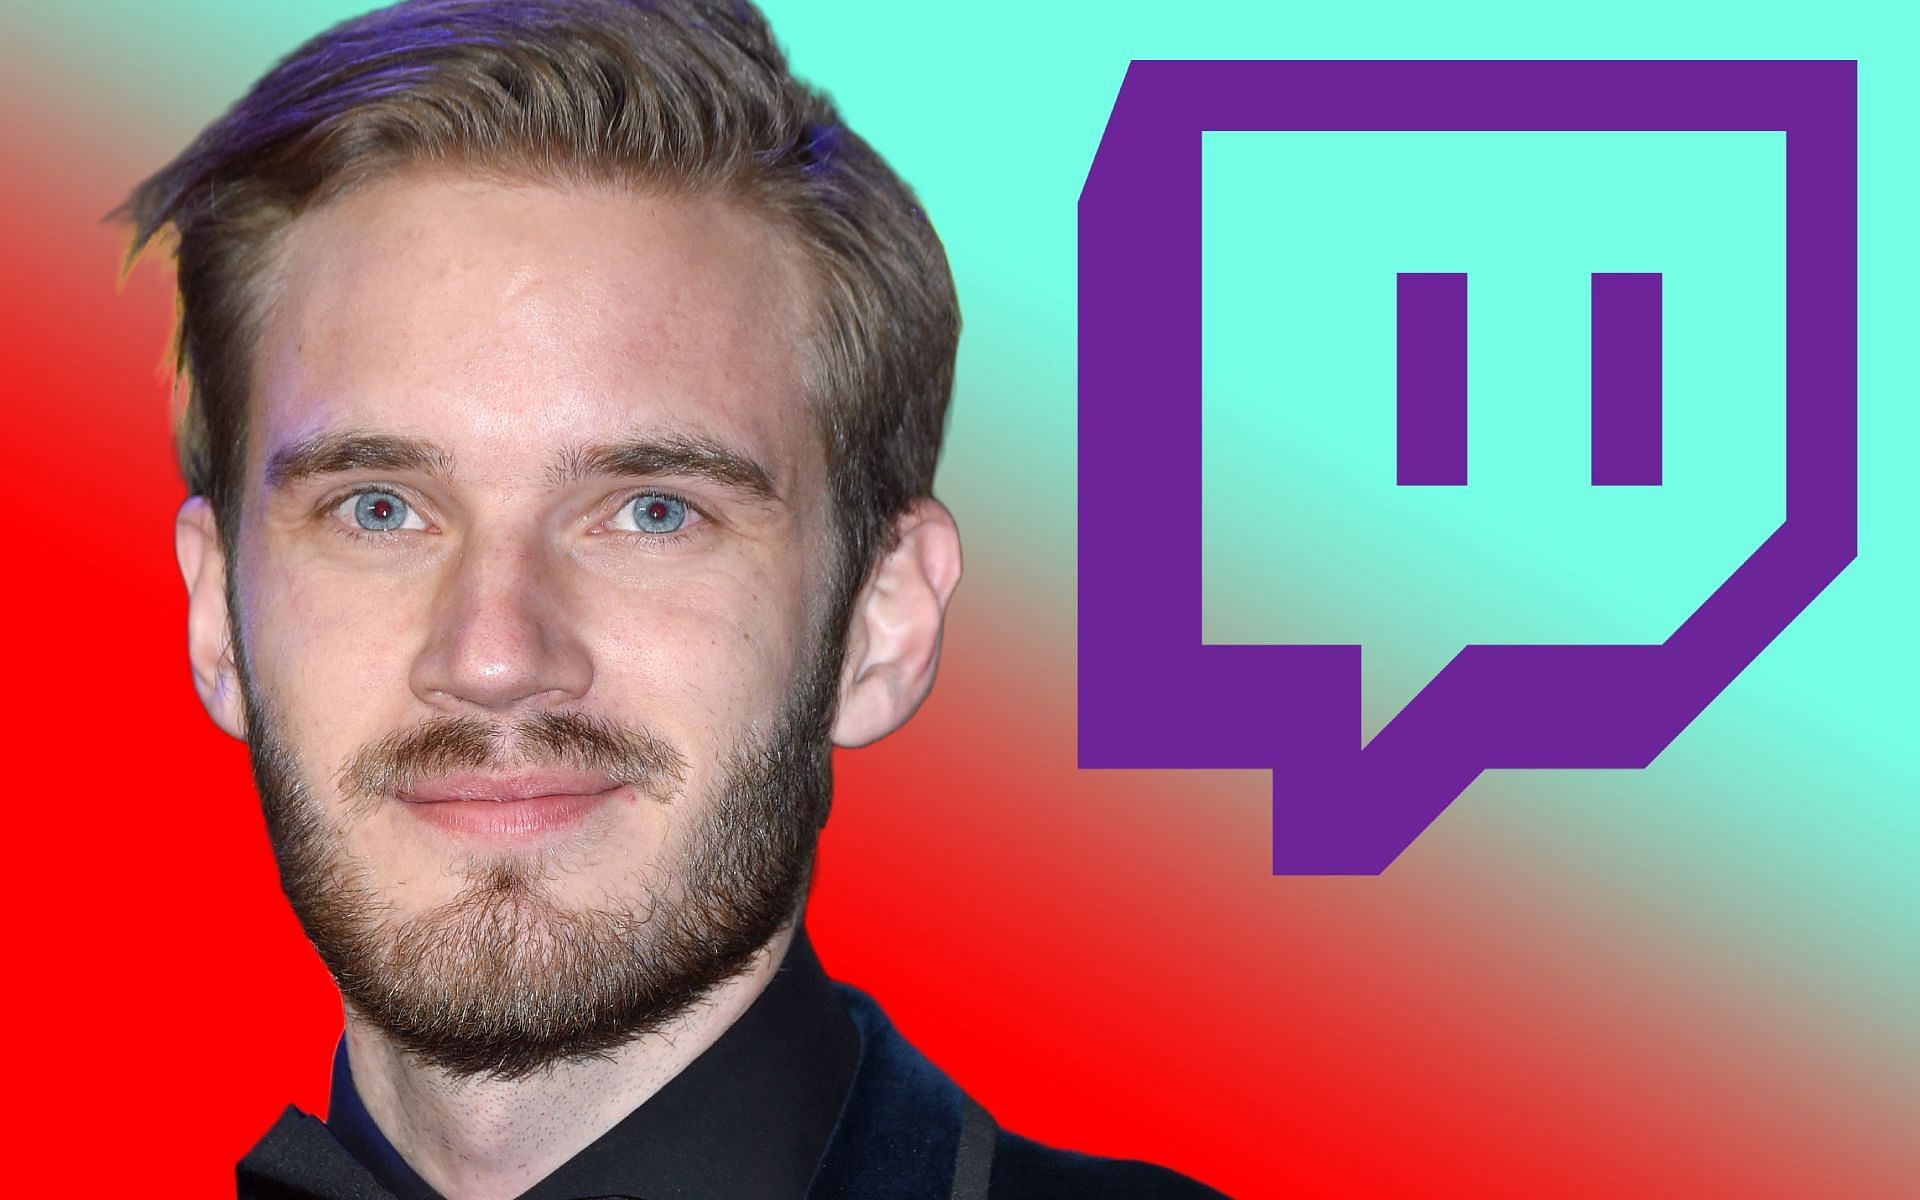 Taking a look into what the streaming community had to say about PewDiePie